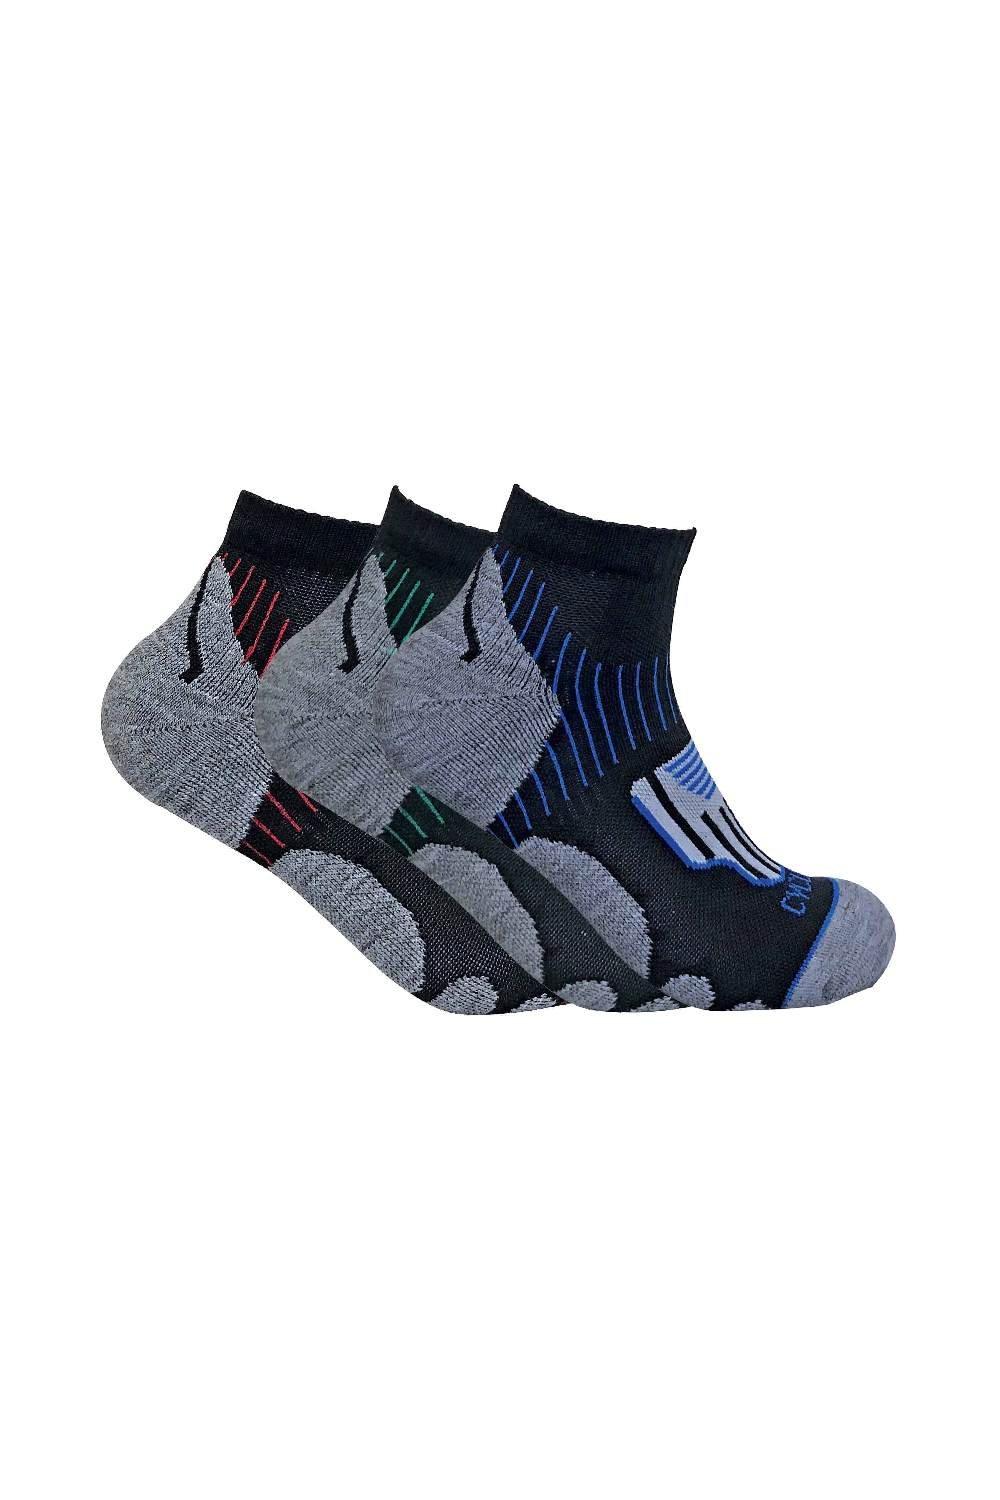 3 Pairs Breathable Cushioned Heel Sports Cycling Ankle Socks